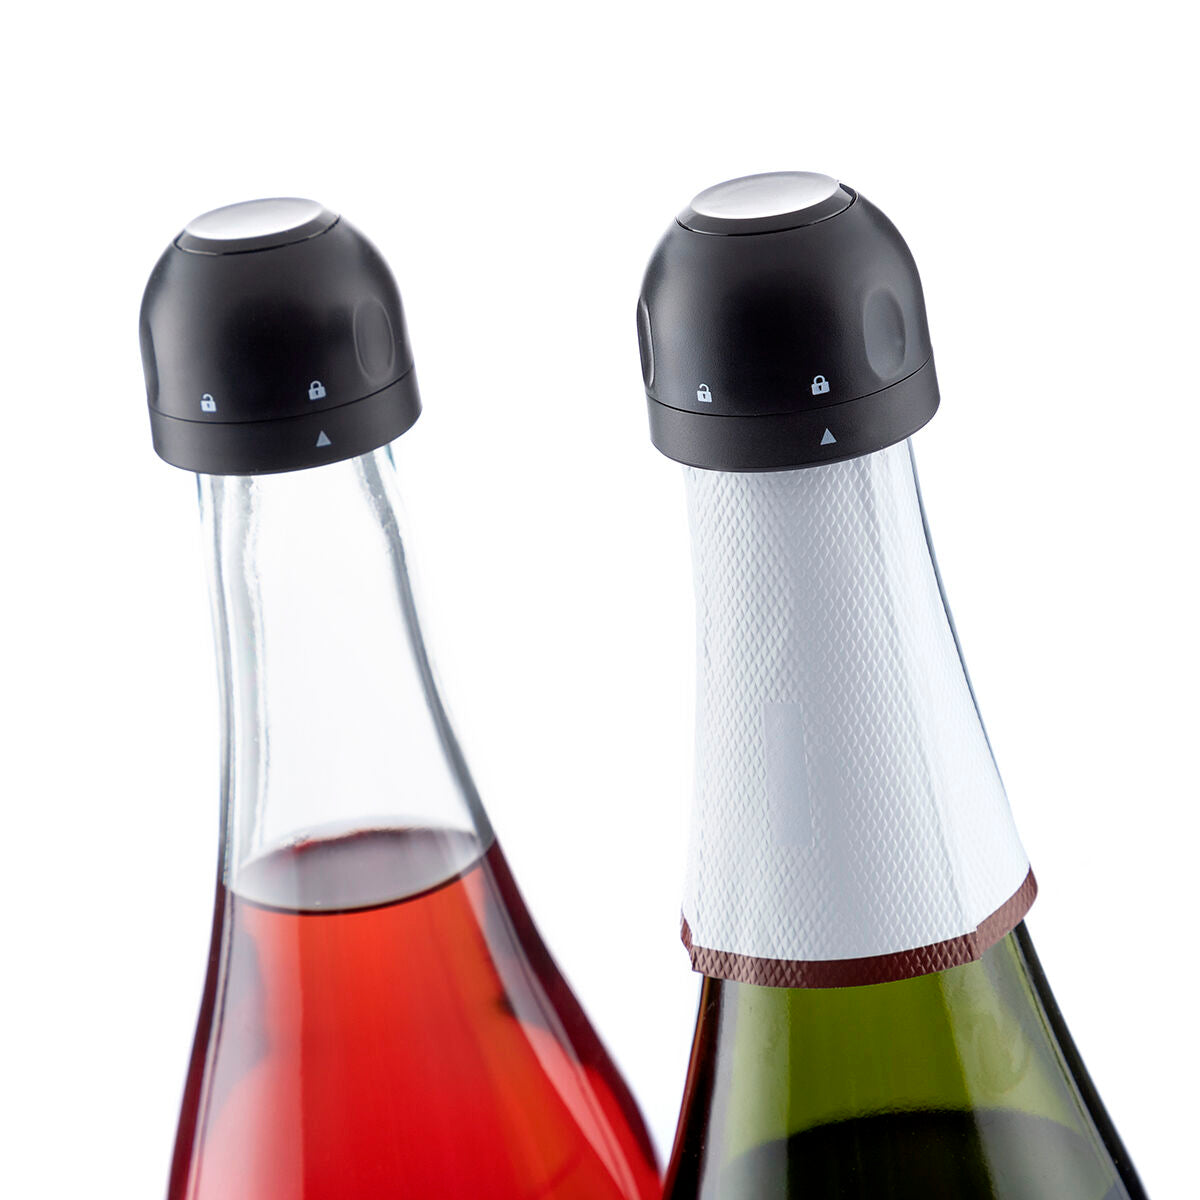 Set of Champagne Stoppers Fizzave InnovaGoods Pack of 2 units